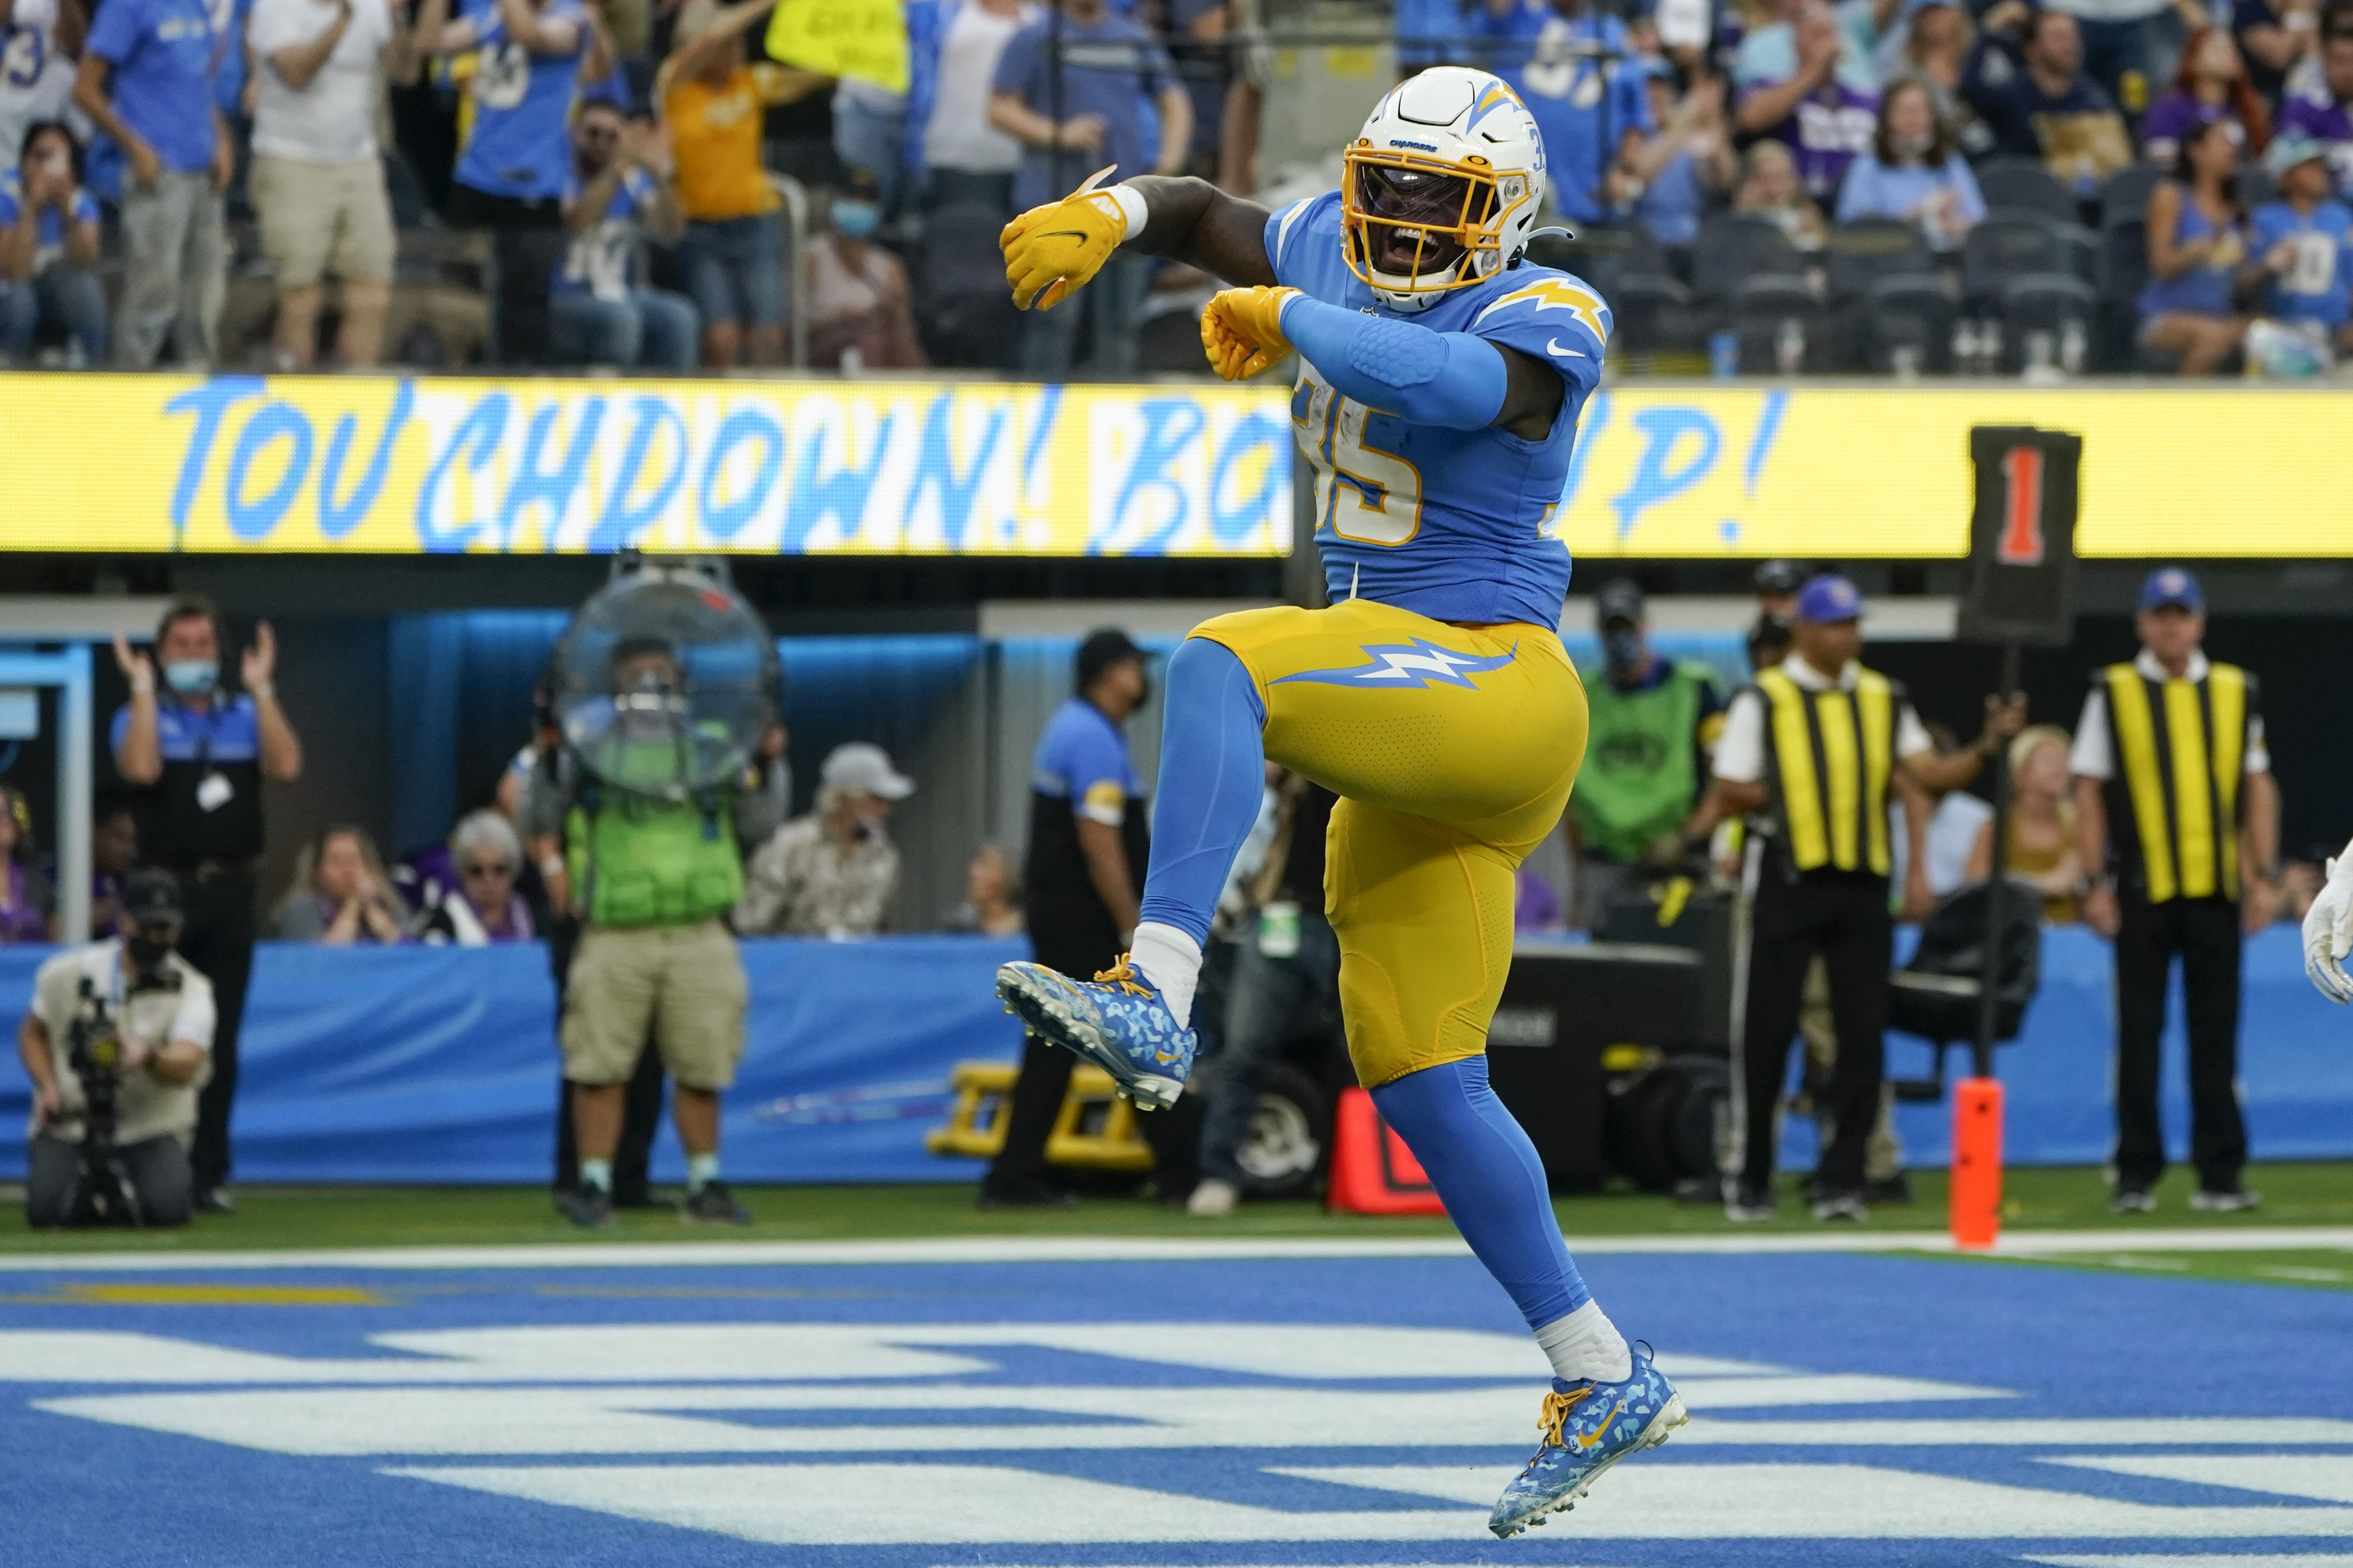 San Diego Chargers Uniform Remains Unchanged - Bolts From The Blue